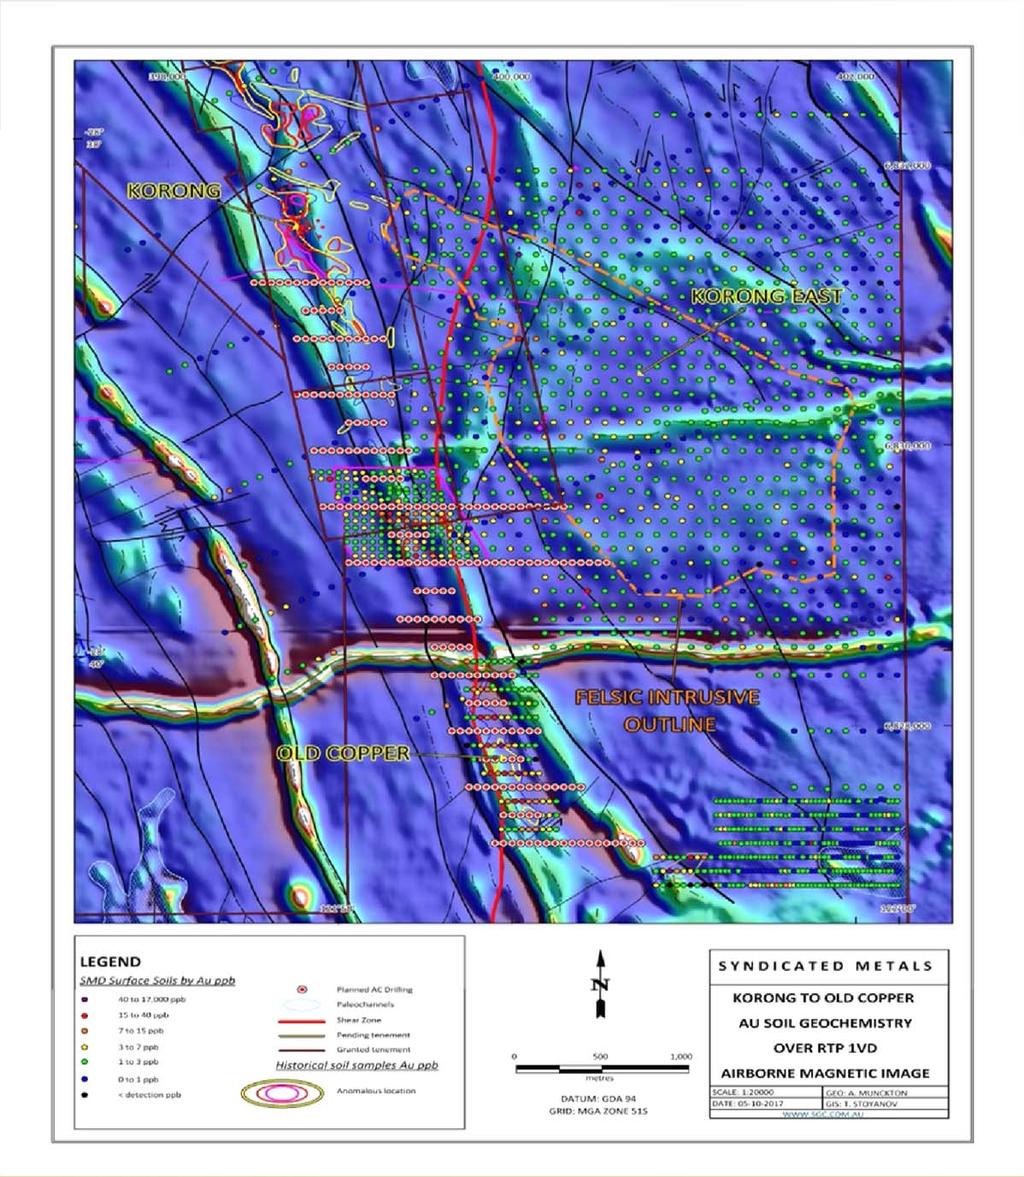 Korong to Old Copper Soil sampling indicates mineralised corridor 4km long, containing multiple zones of elevated gold hosted in the Korong Ultramafic unit (KUU) N S oriented Korong Shear Zone (KSZ)